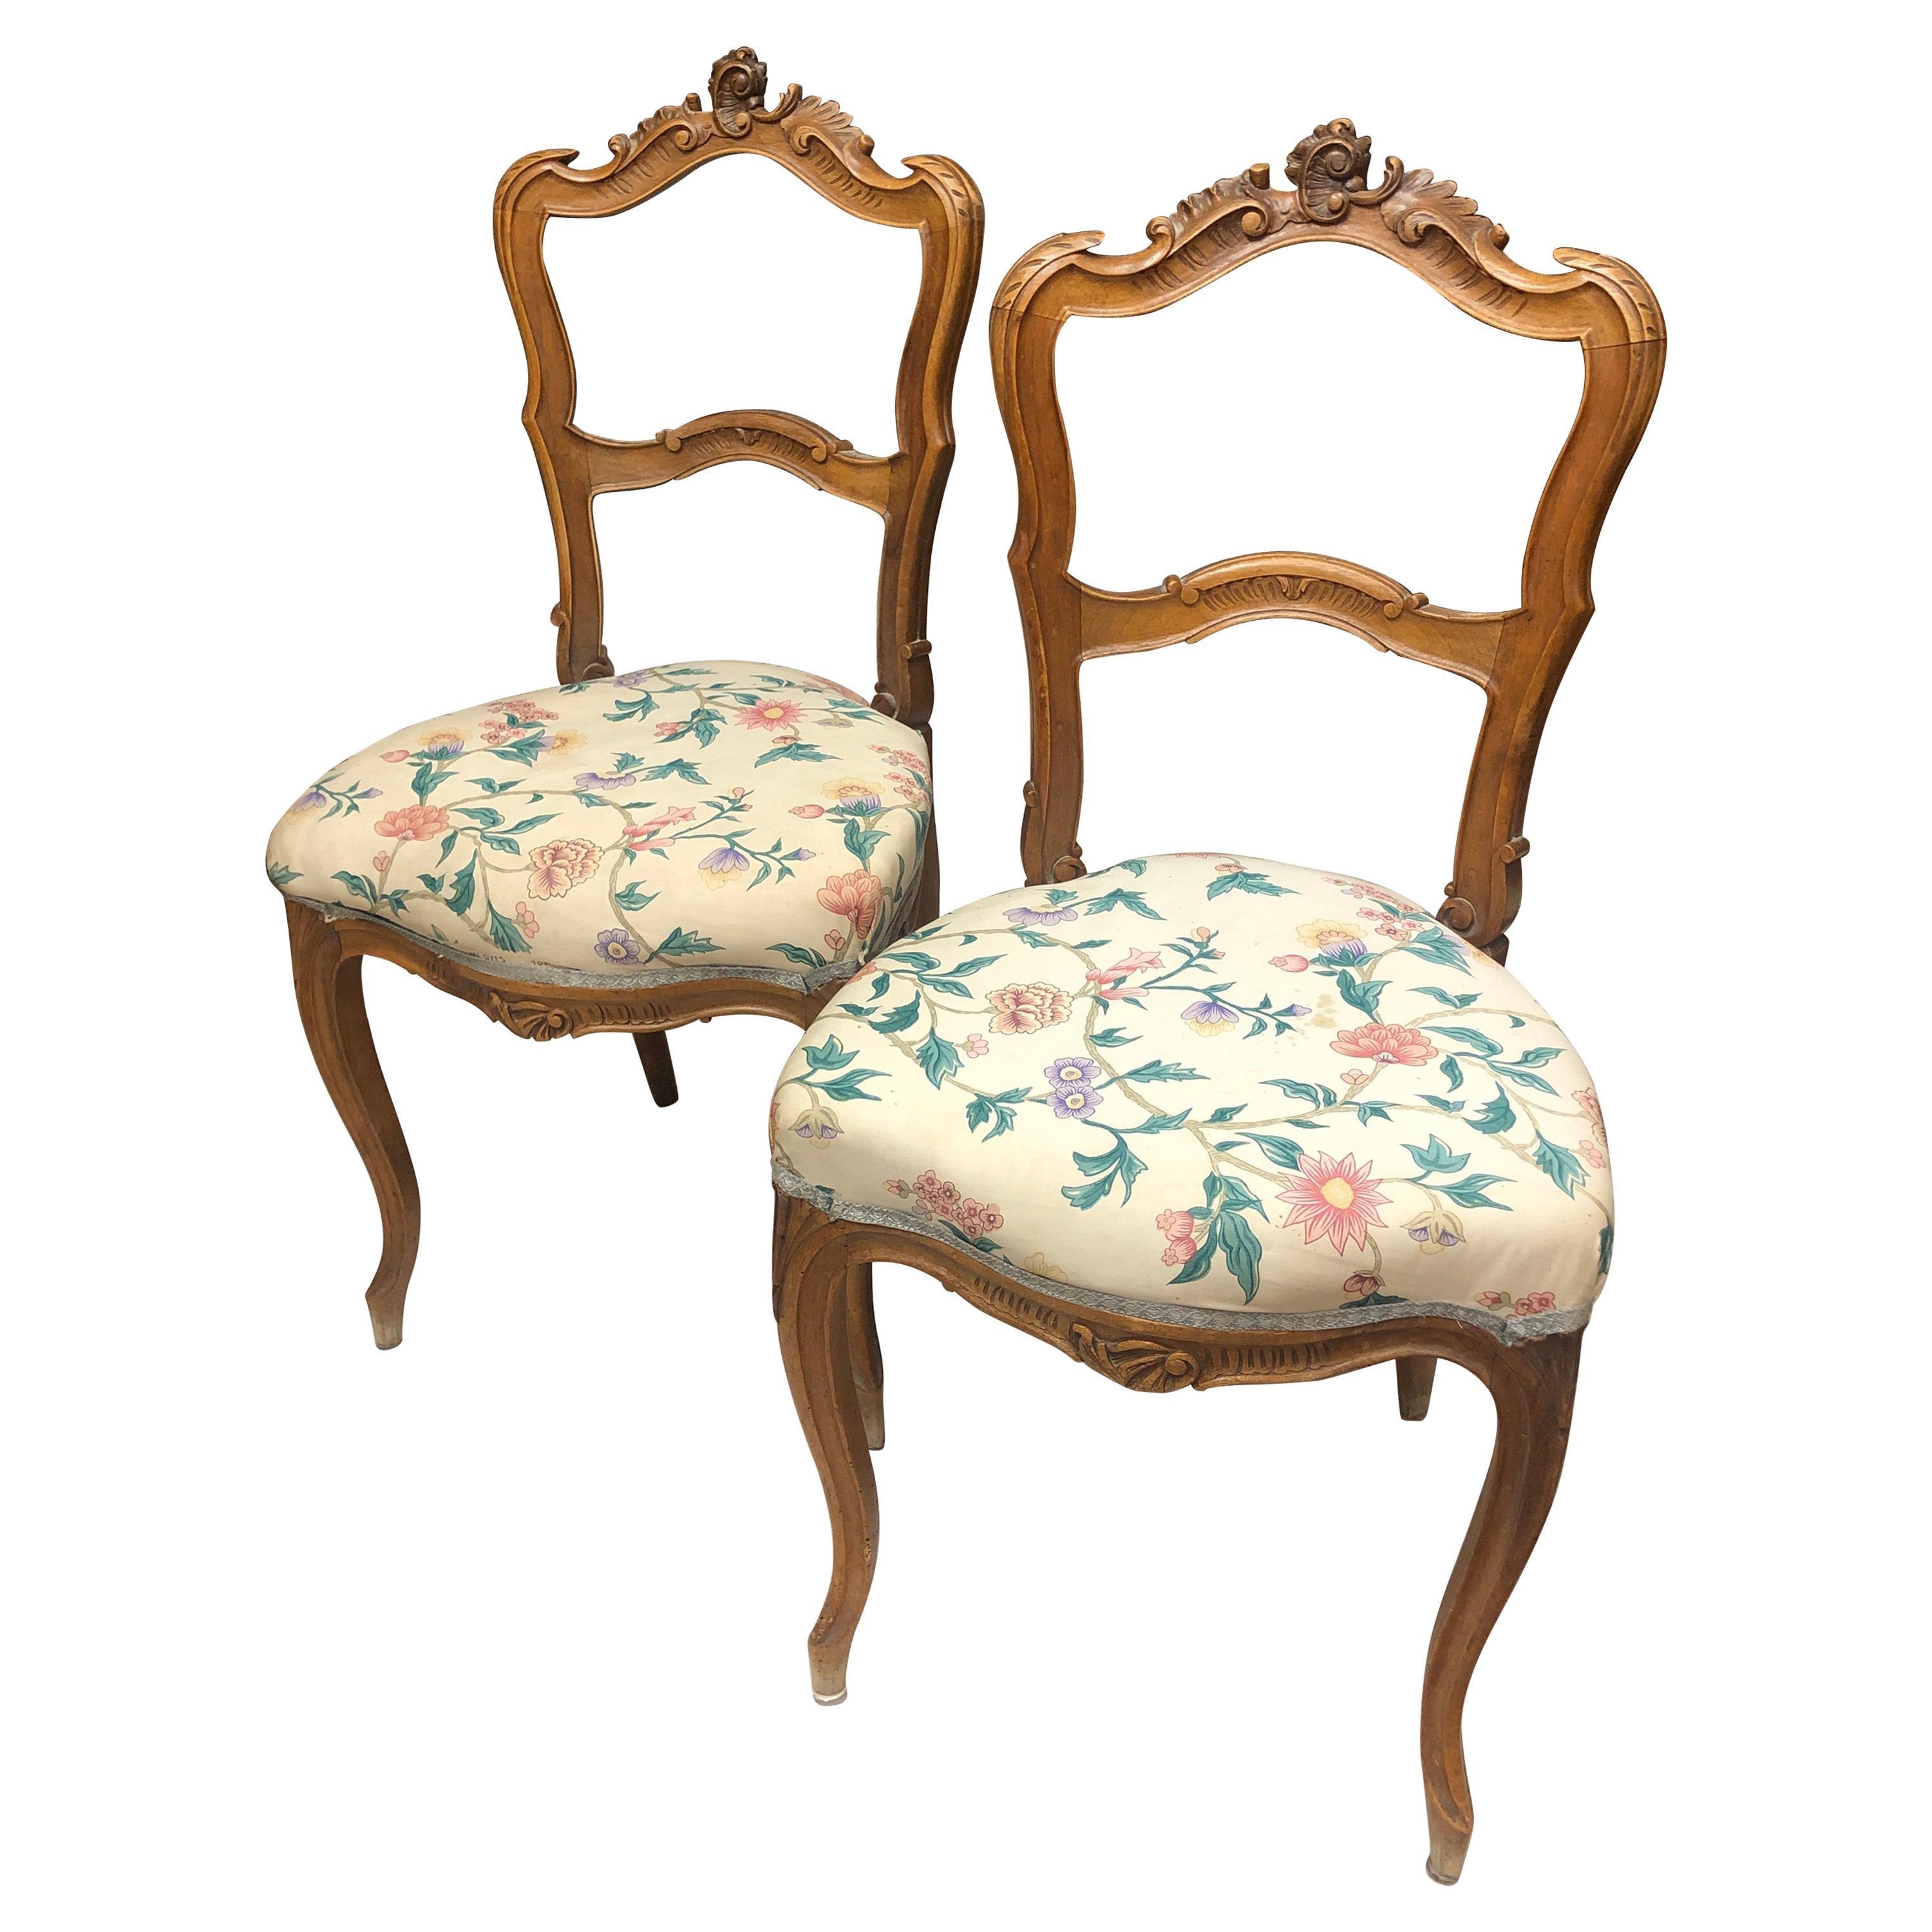 19th Century French Walnut Hand Carved Chairs in Louis XV Style